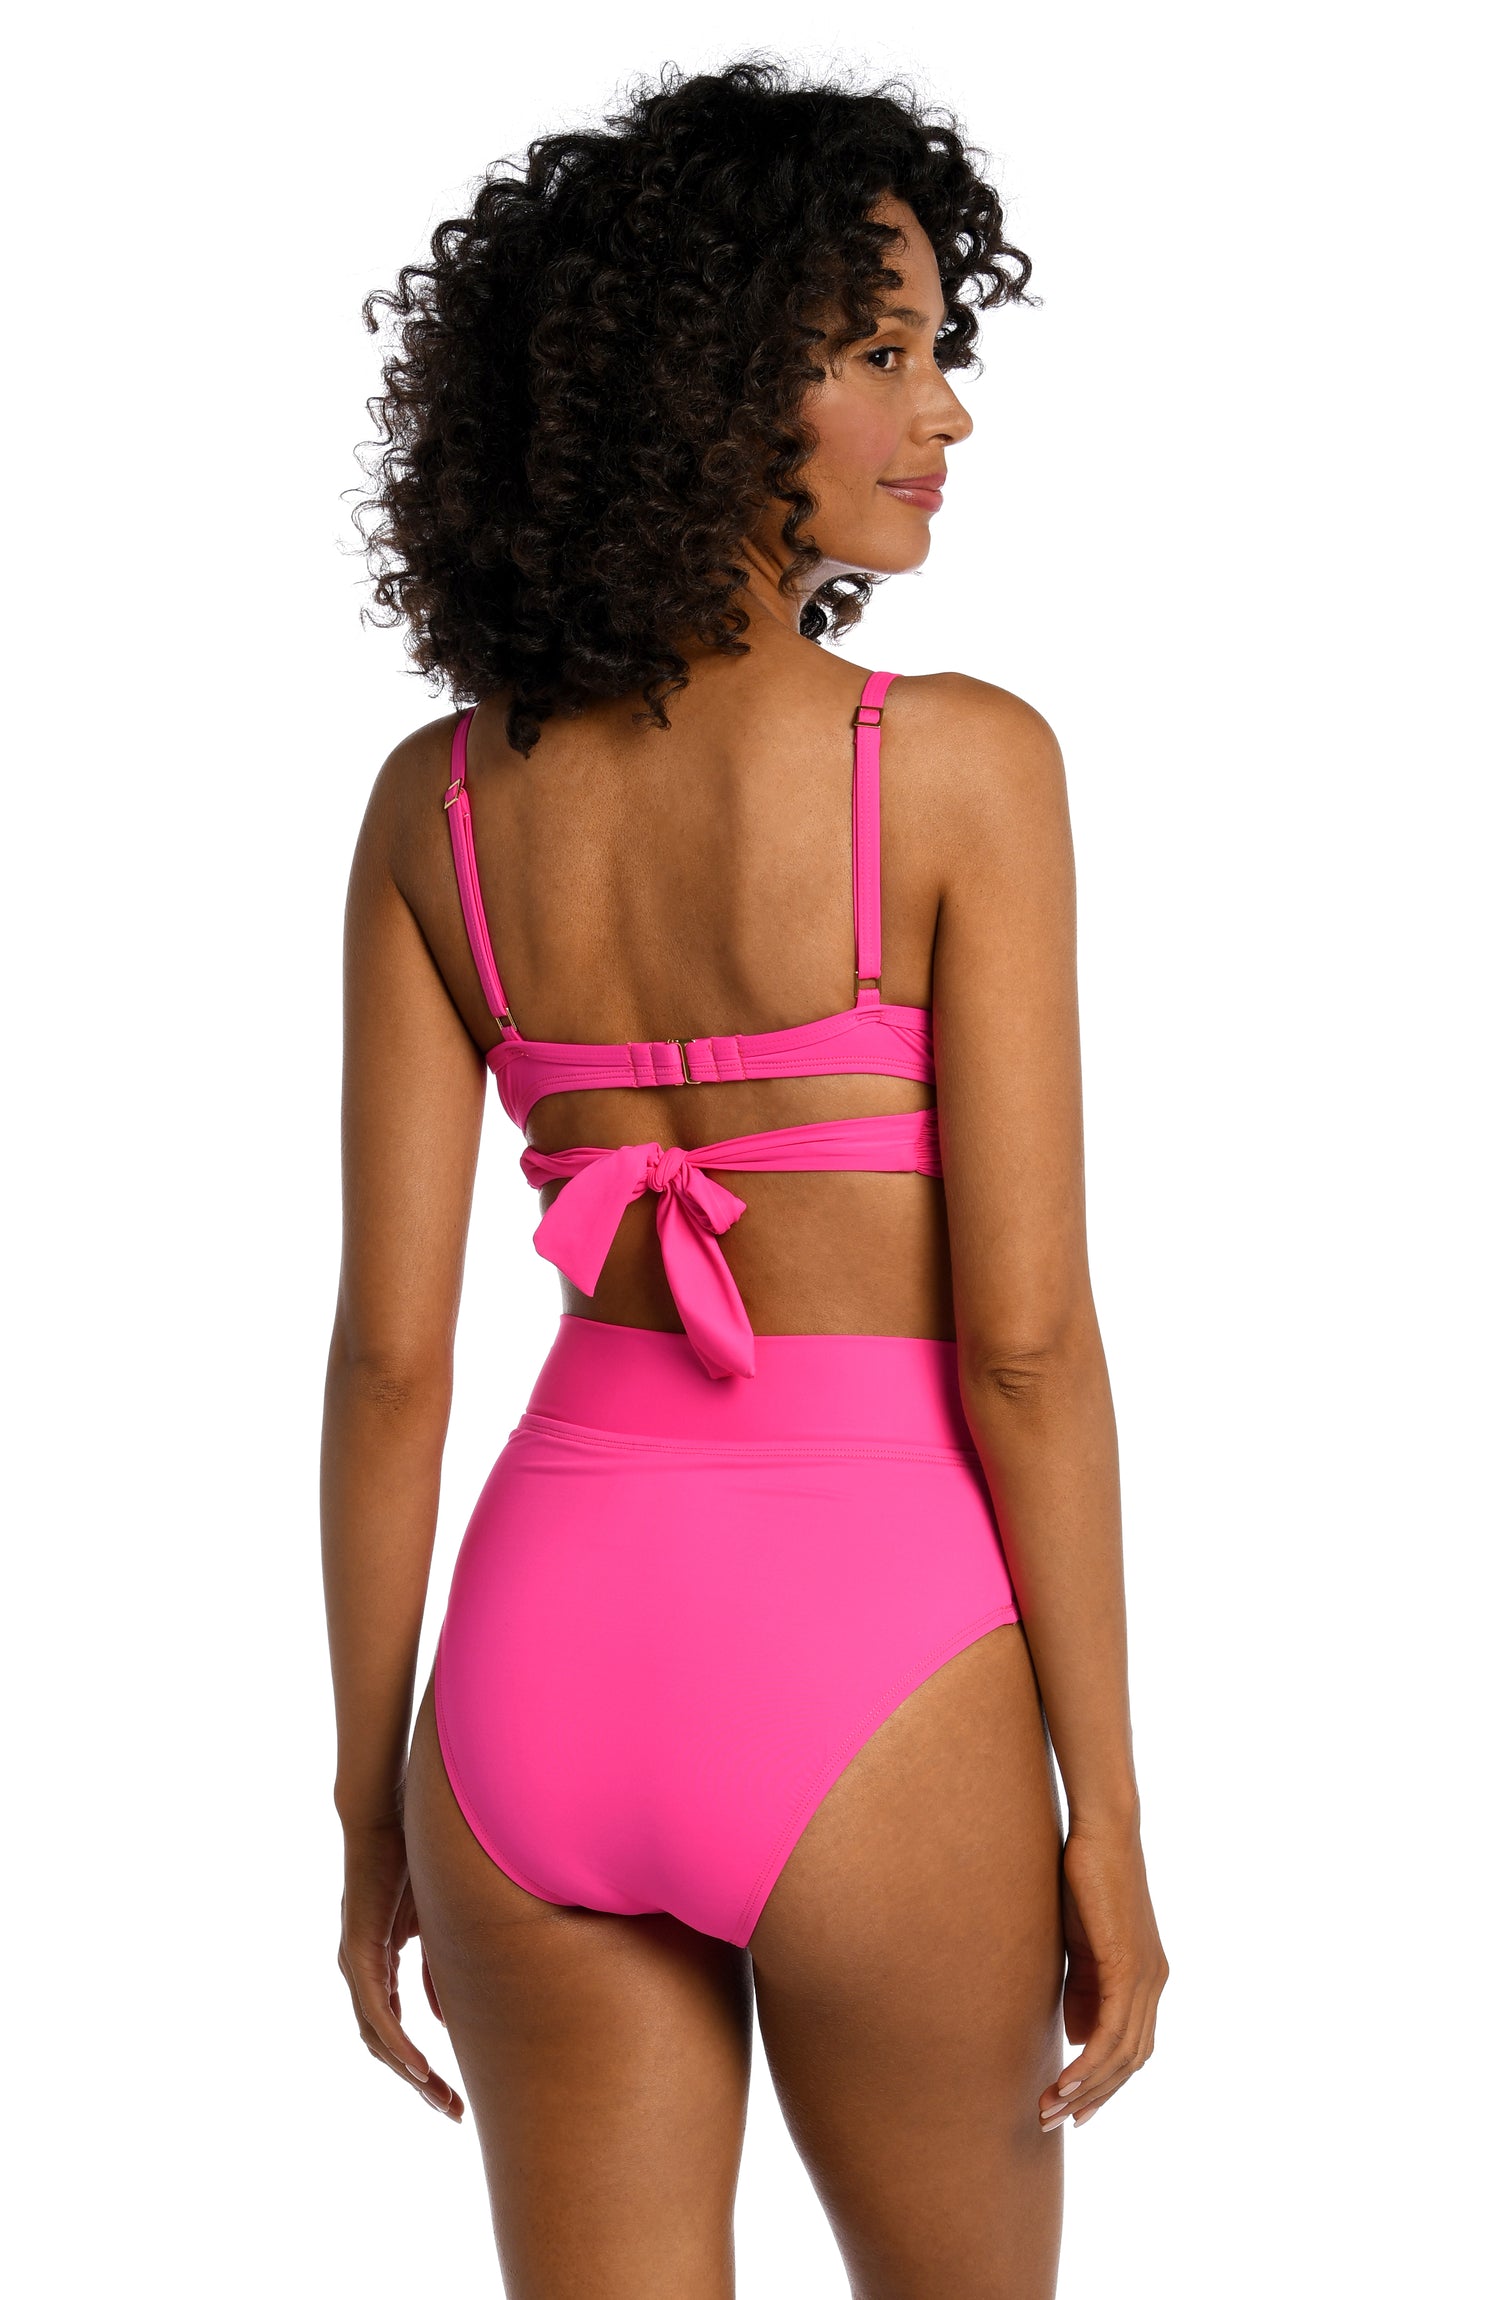 Model is wearing a pop pink colored underwire swimsuit top from our Best-Selling Island Goddess collection.